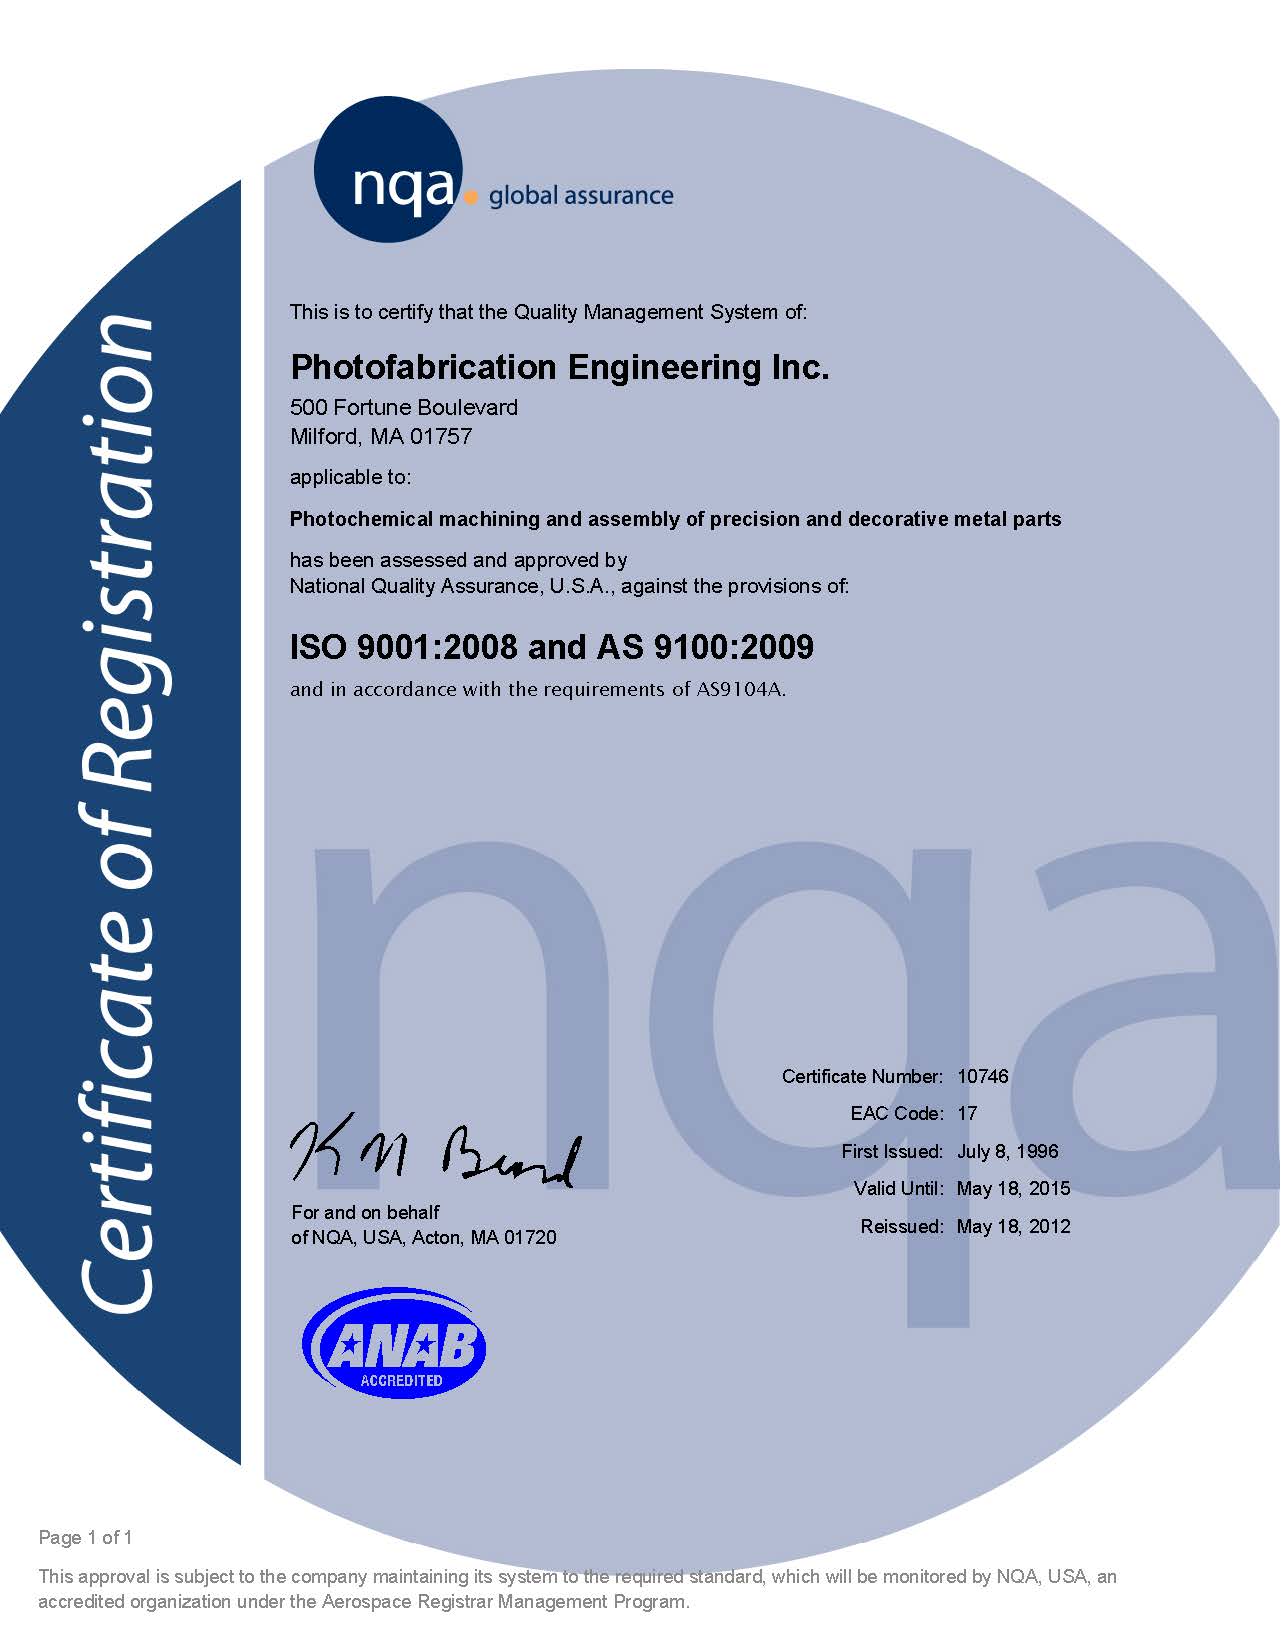 PEI's ANAB and NQA Quality Certifications Through 5/18/15